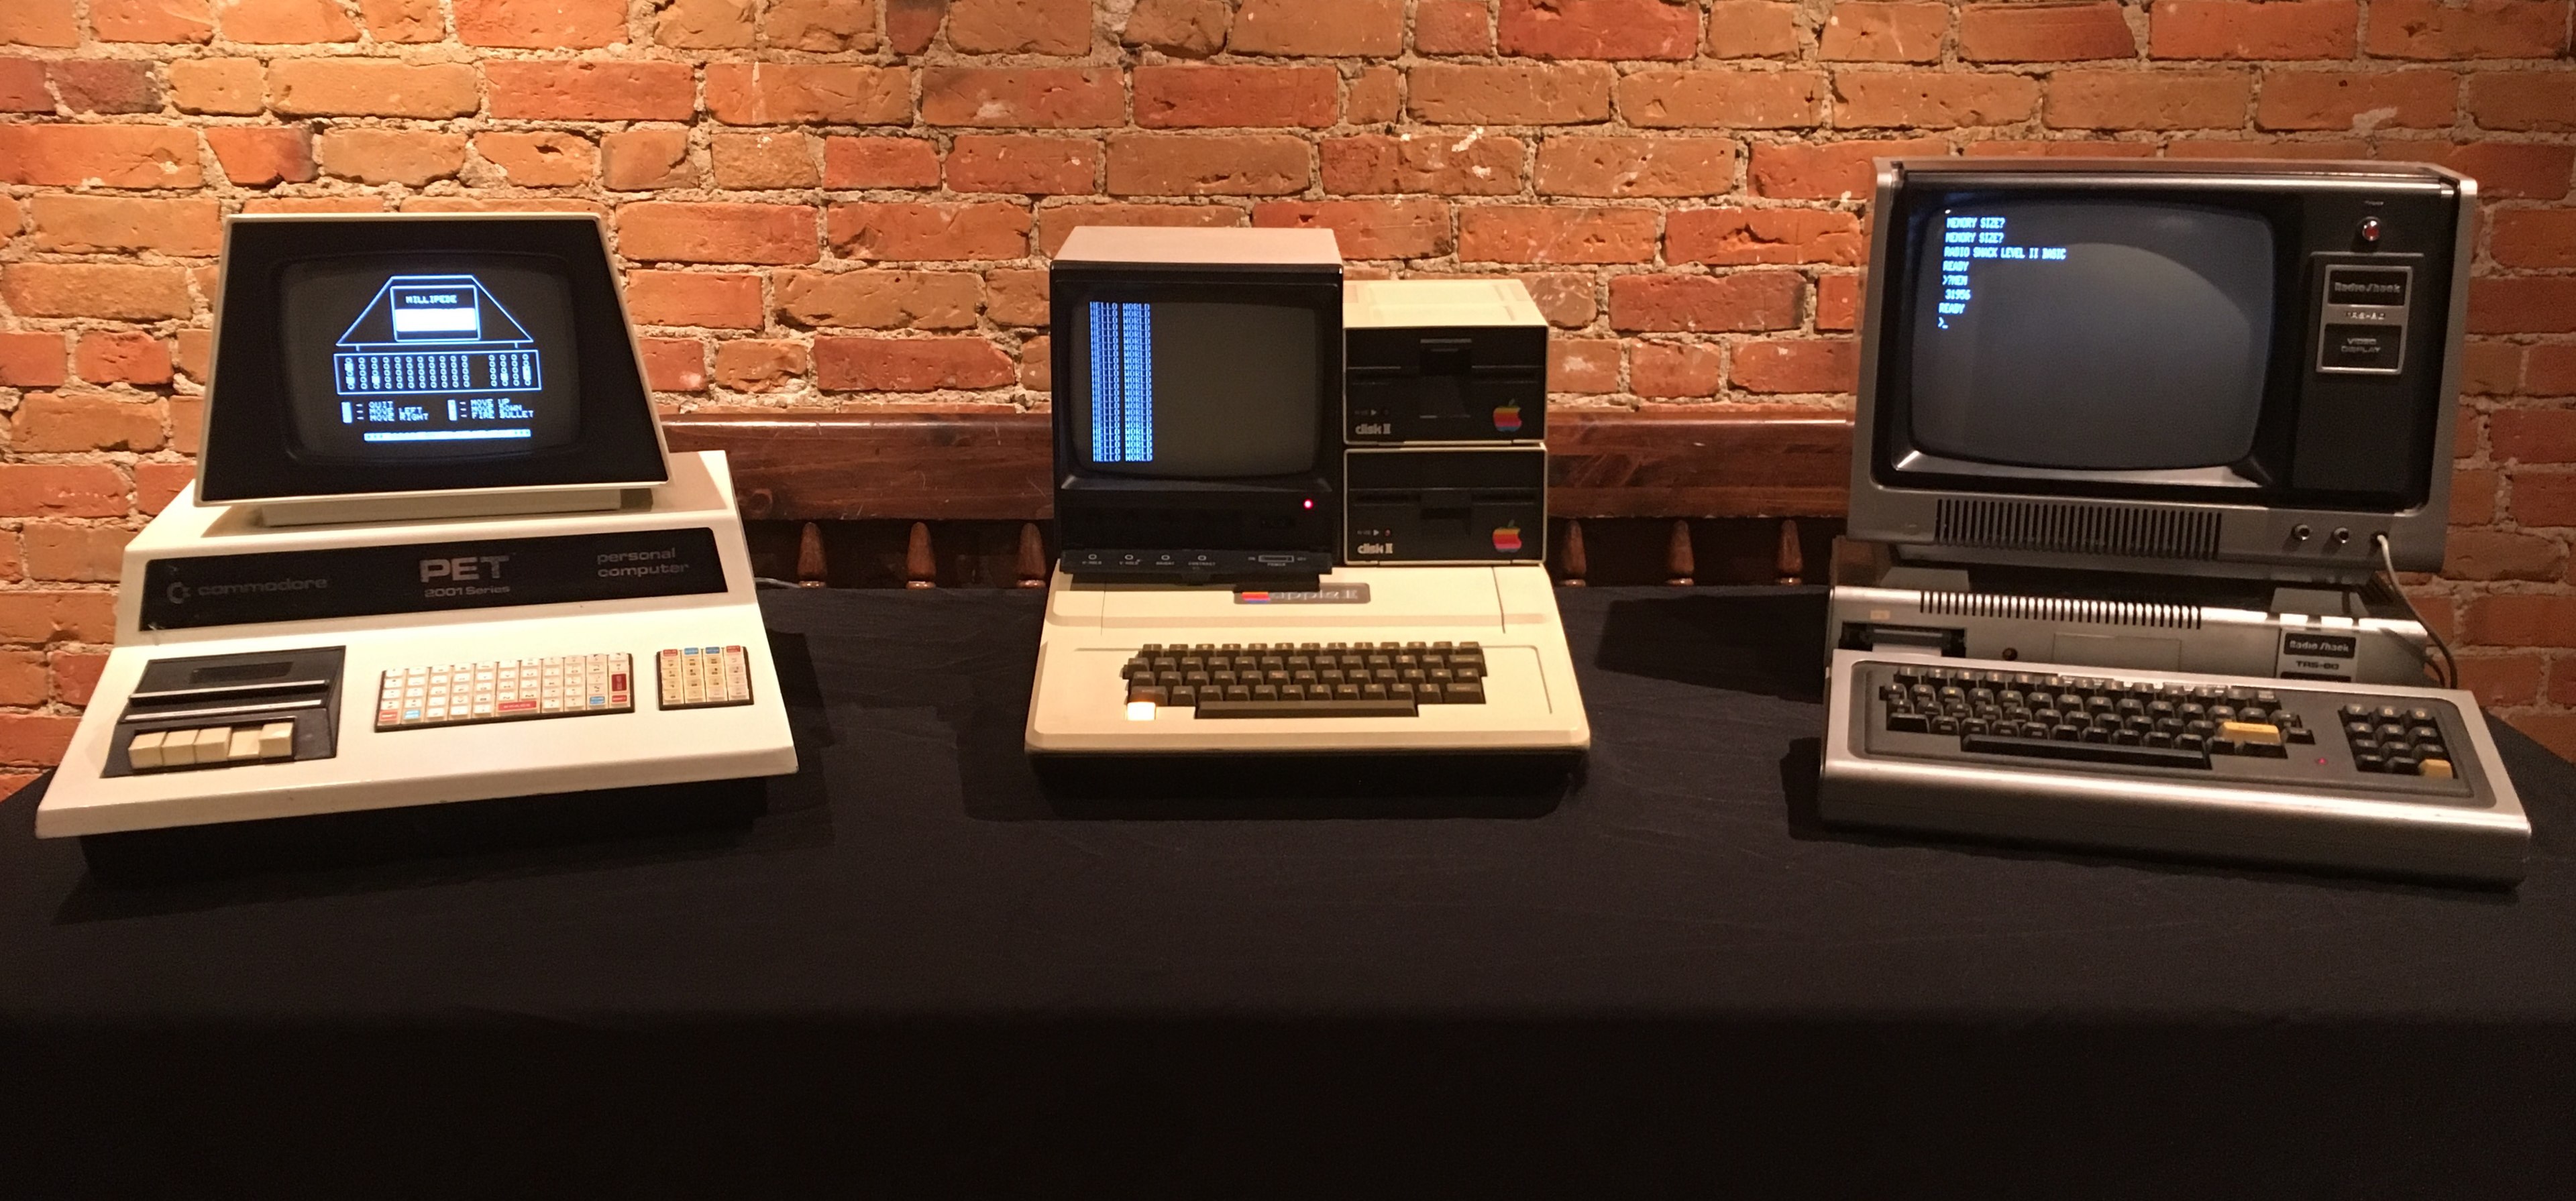 ThePET, Apple II, and TRS-80 personal computers.